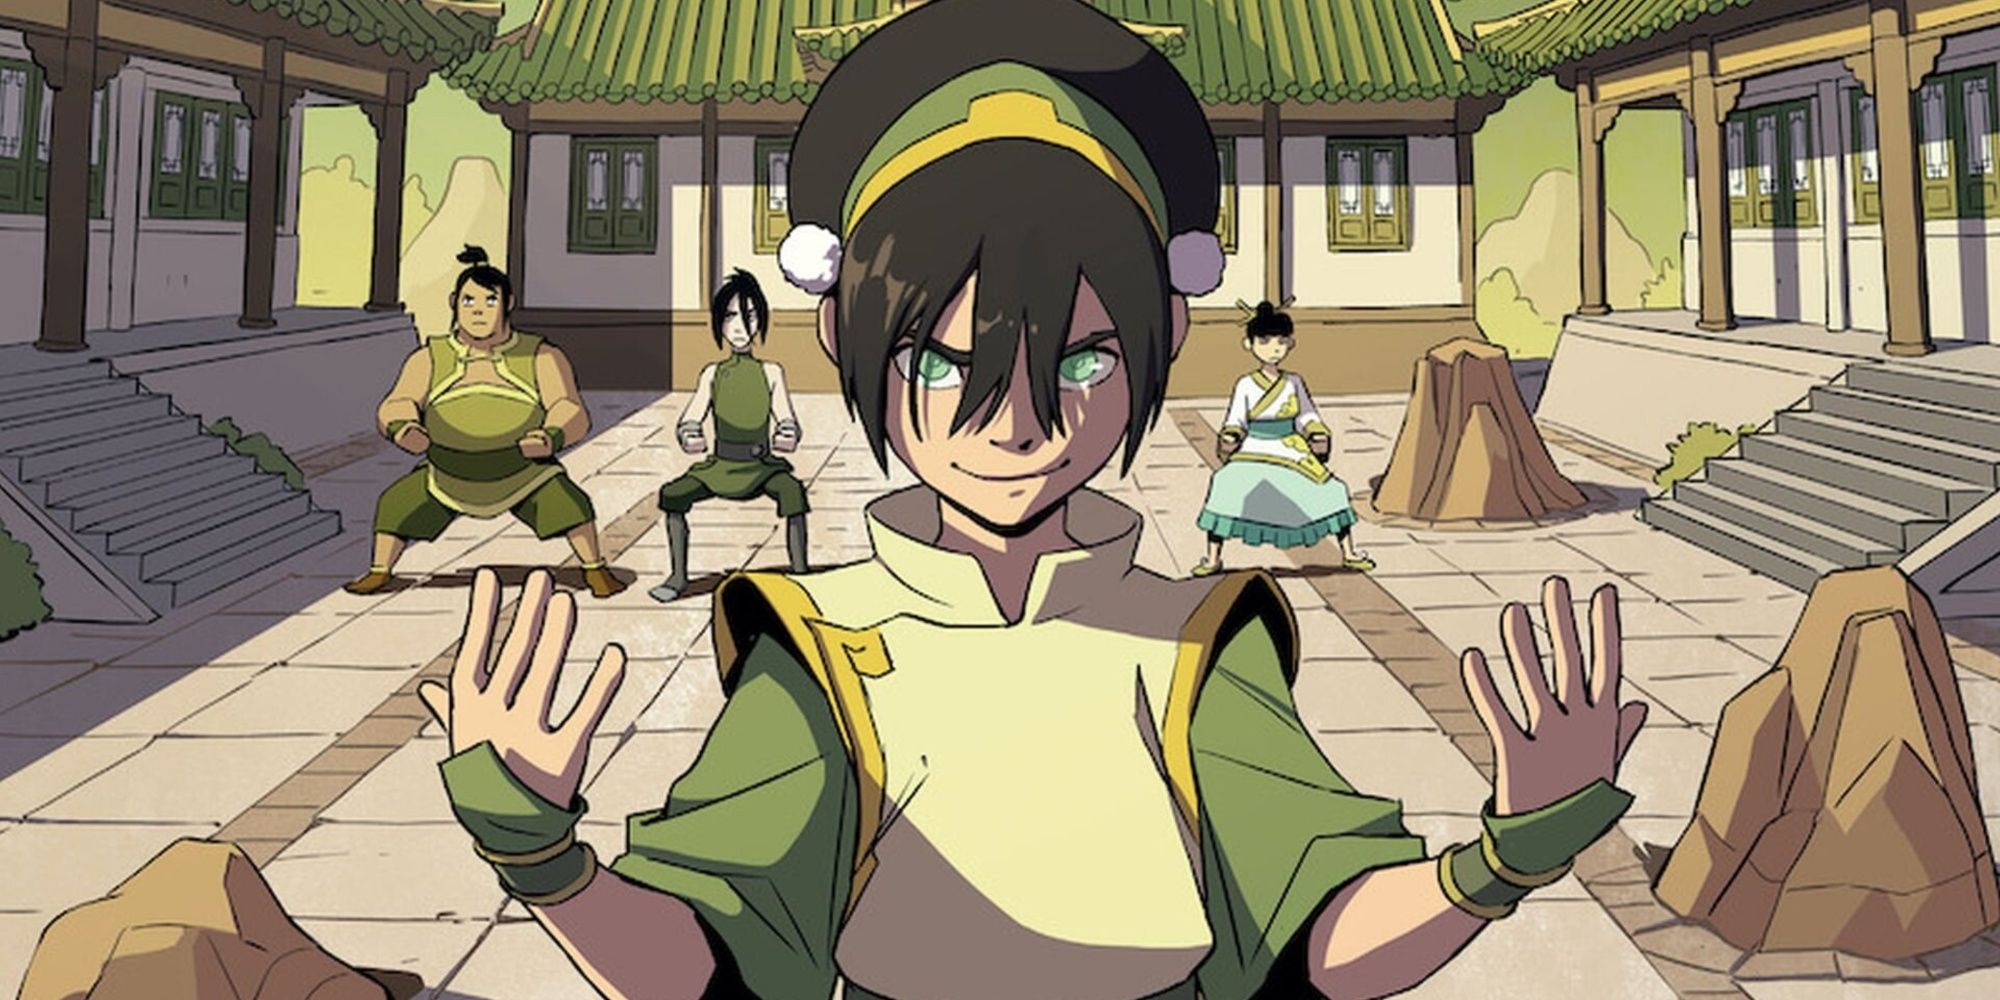 Toph in the comics